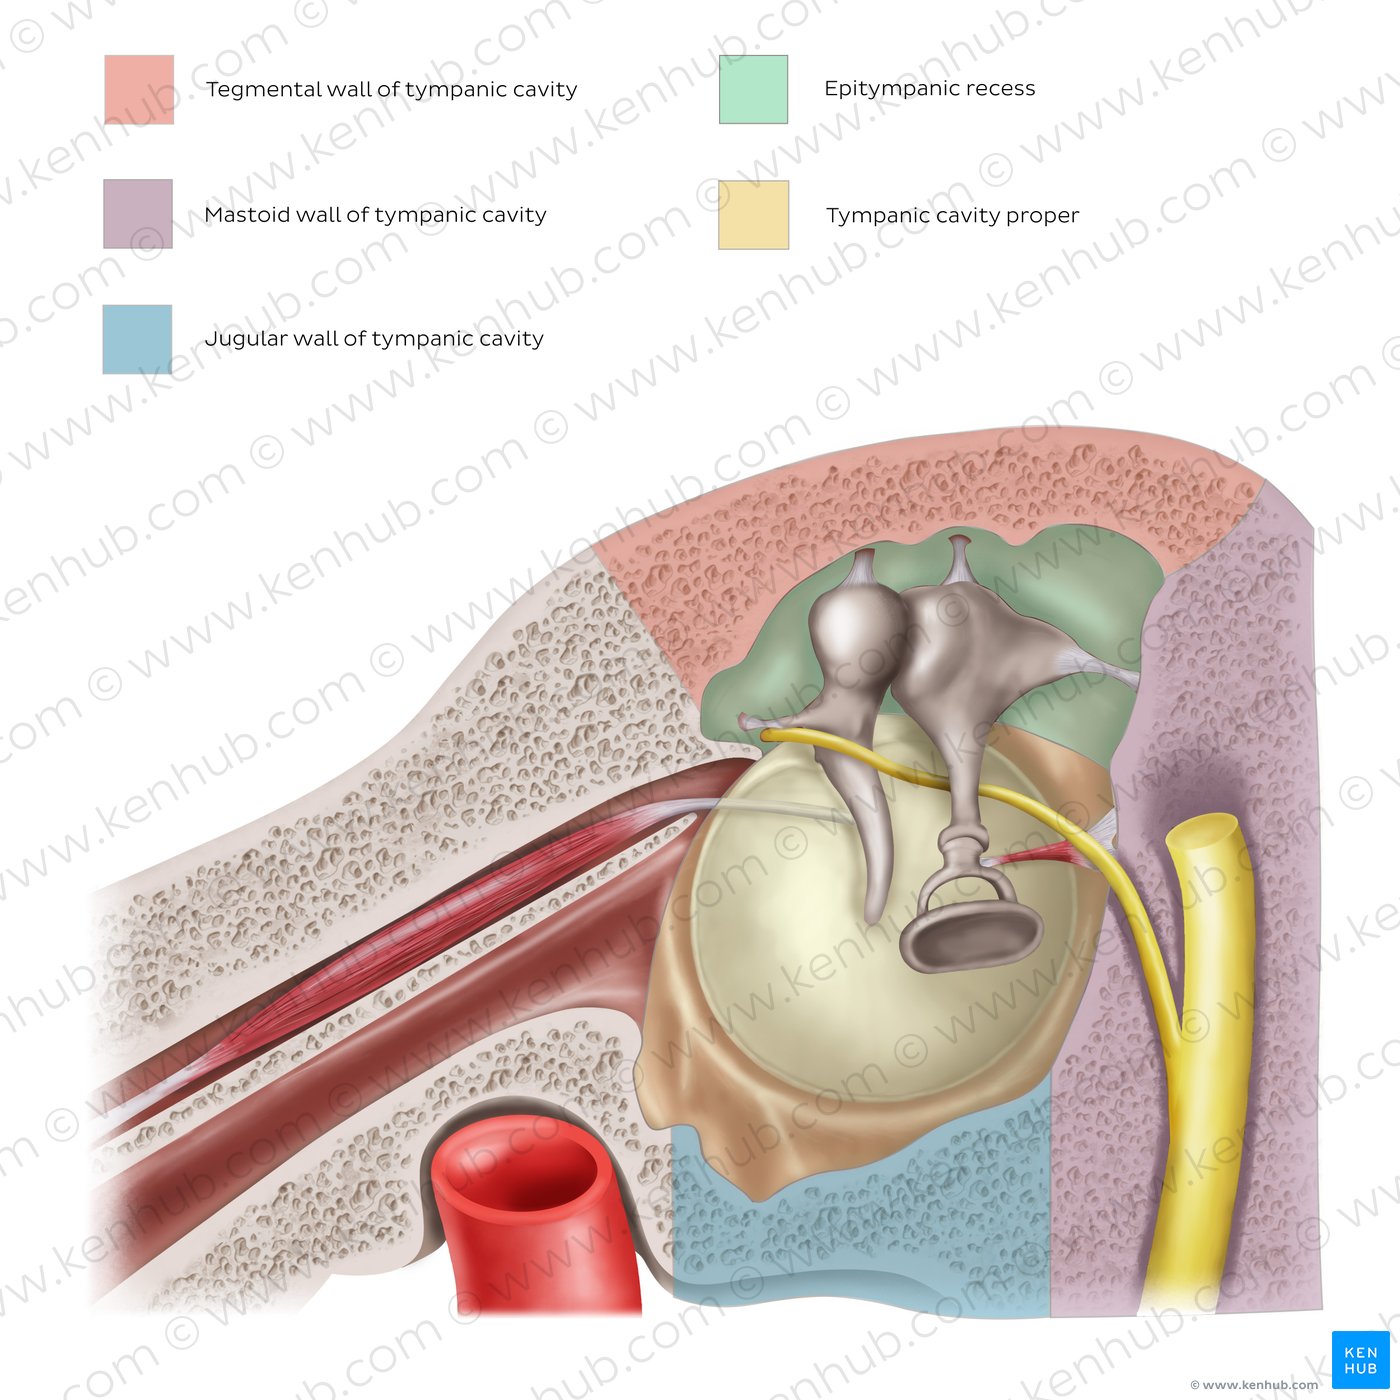 The parts and walls of tympanic cavity: Overview